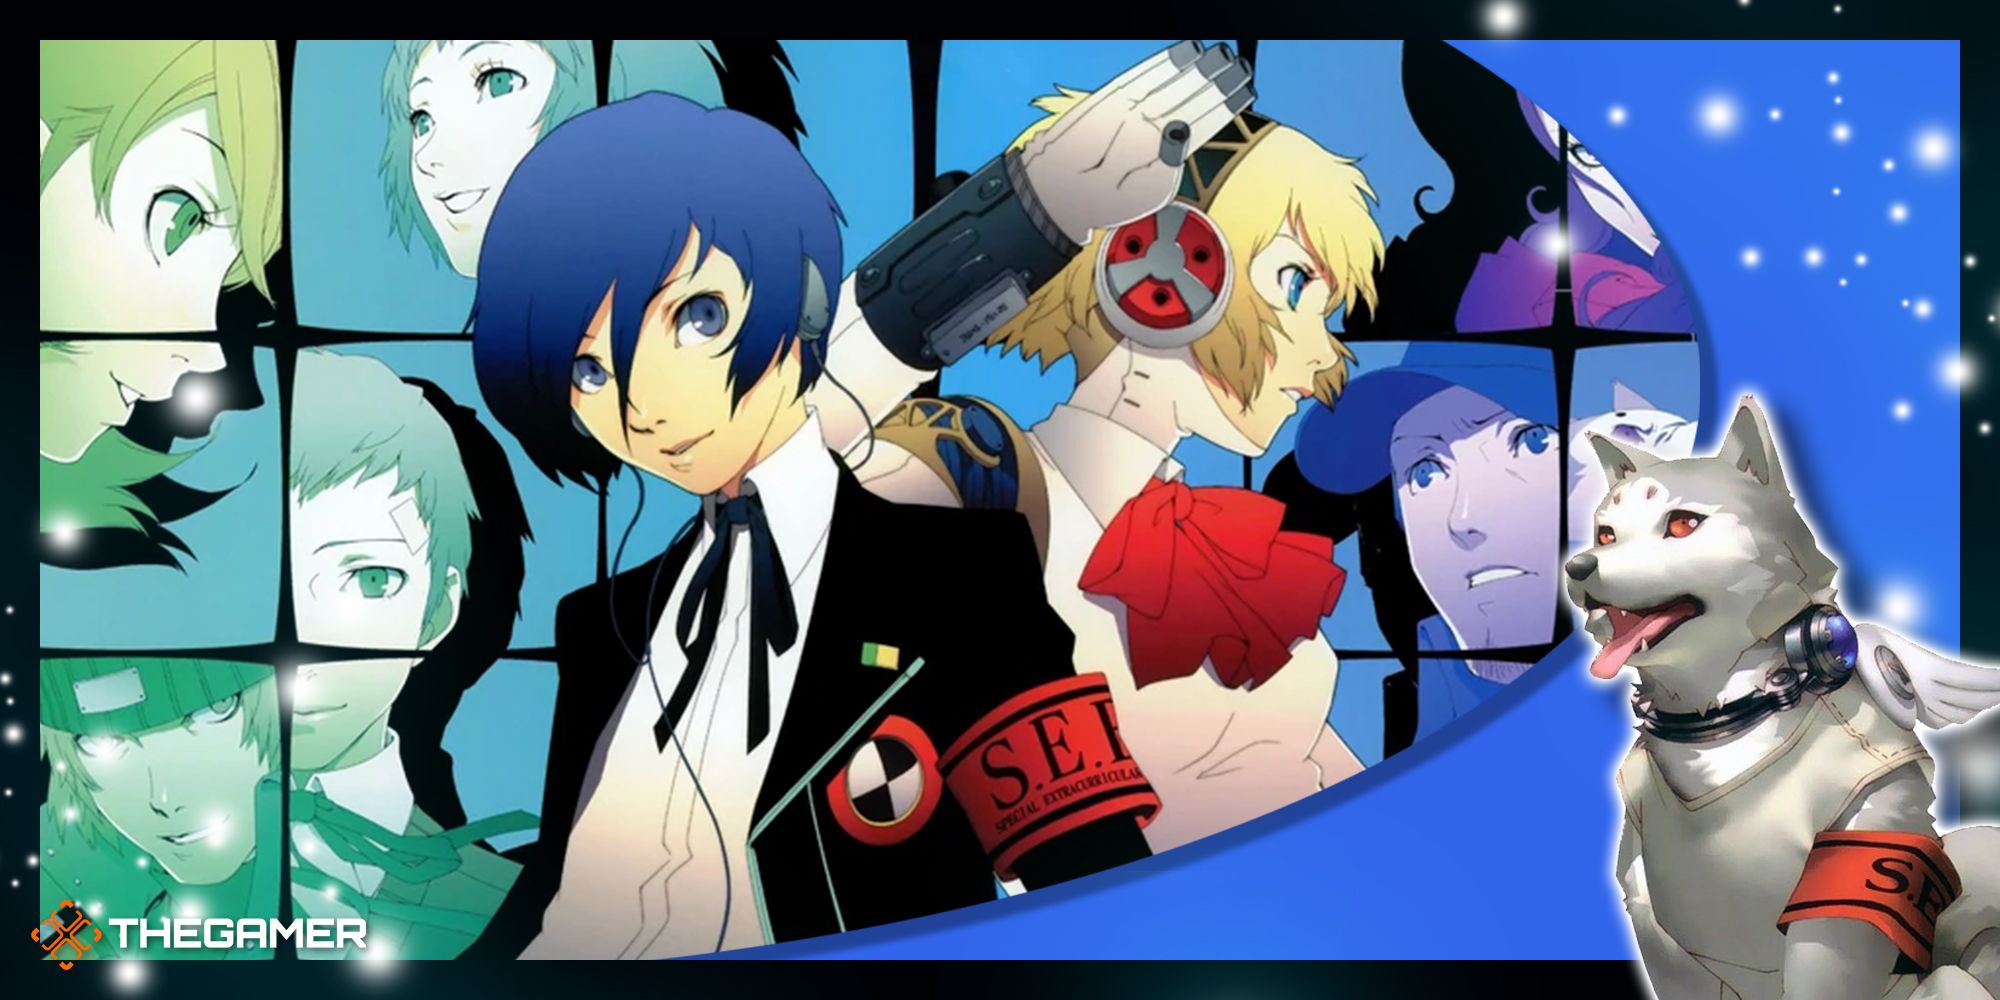 Things You Should Know Before You Start Playing Persona 3 Portable